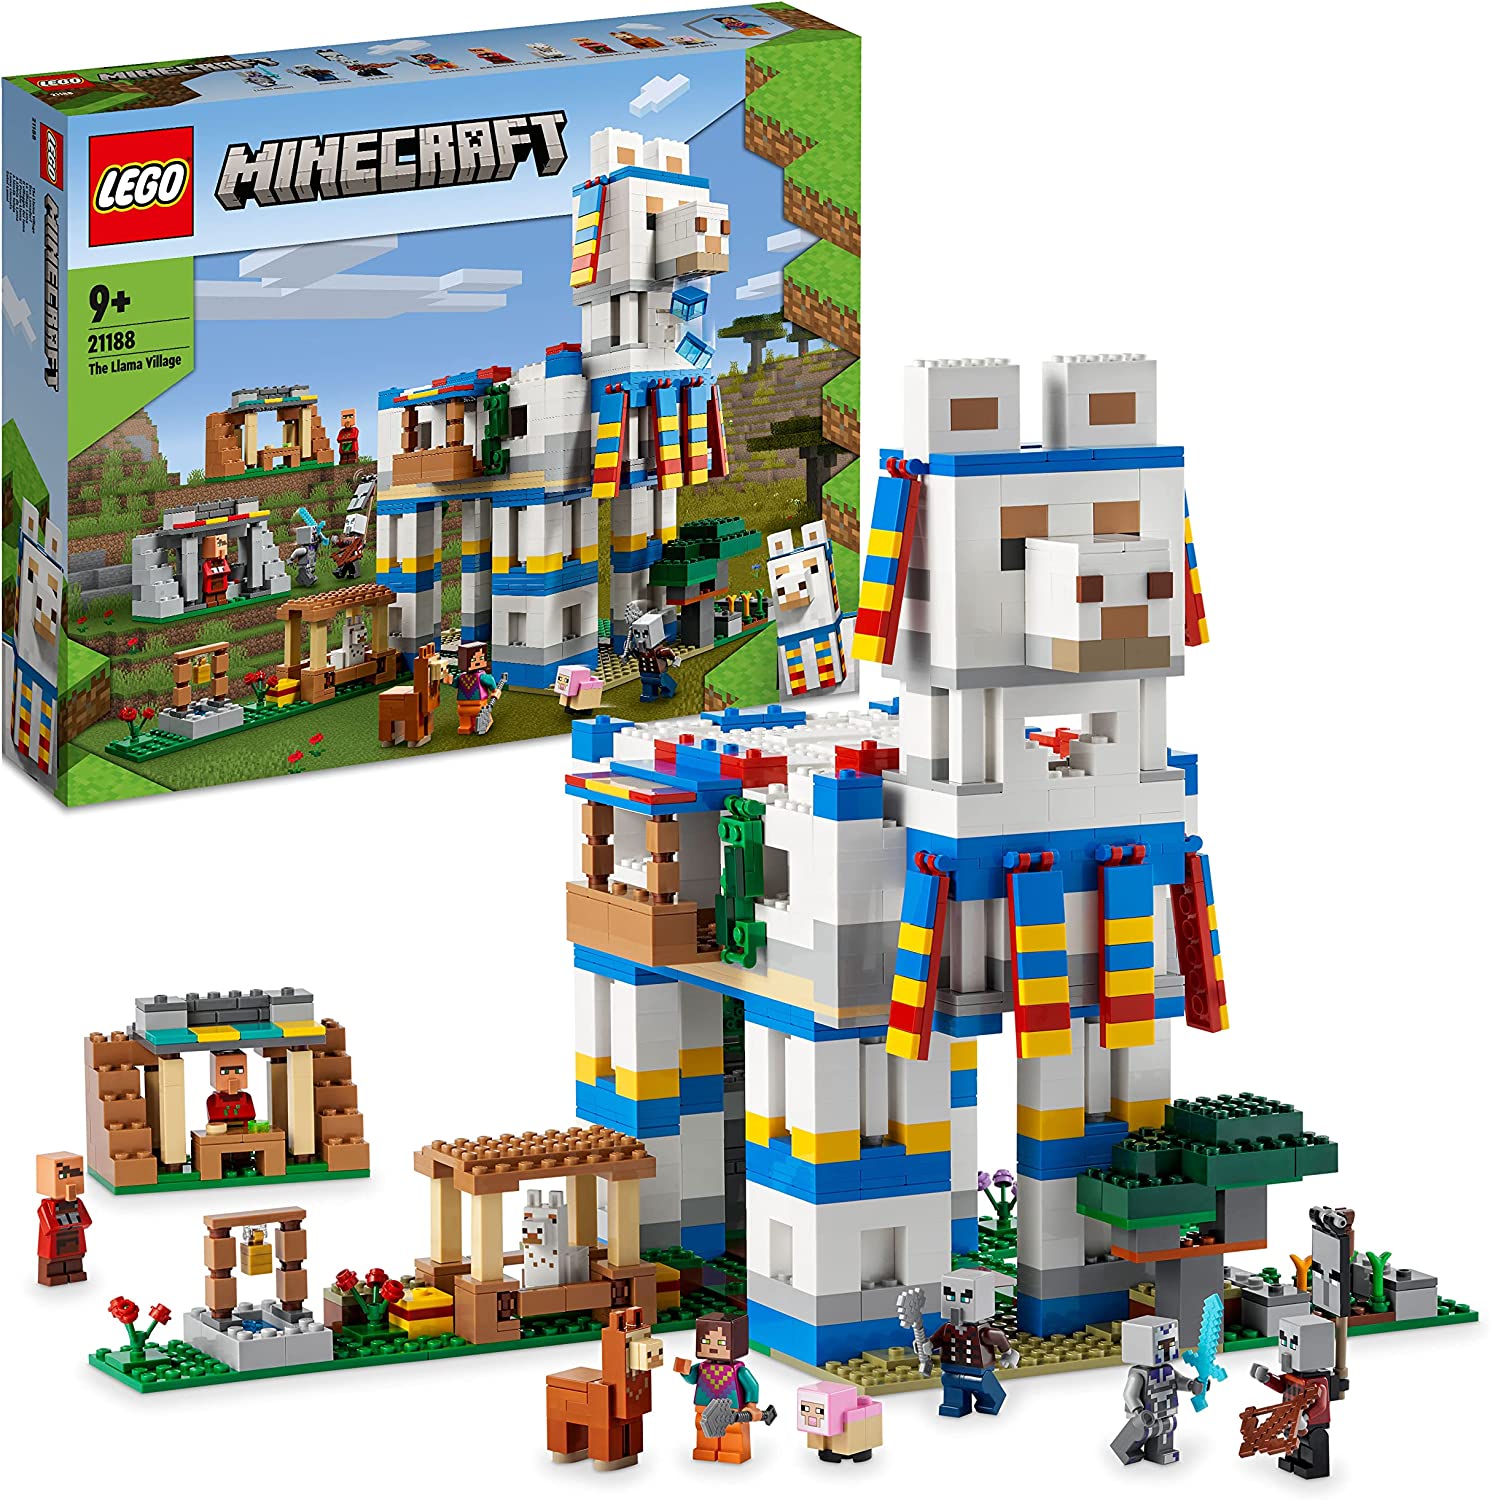 LEGO 21188 Minecraft The Lamadorf Set, Toy House with Village Inhabitants, Animal Figures and 6 Modules, Birthday